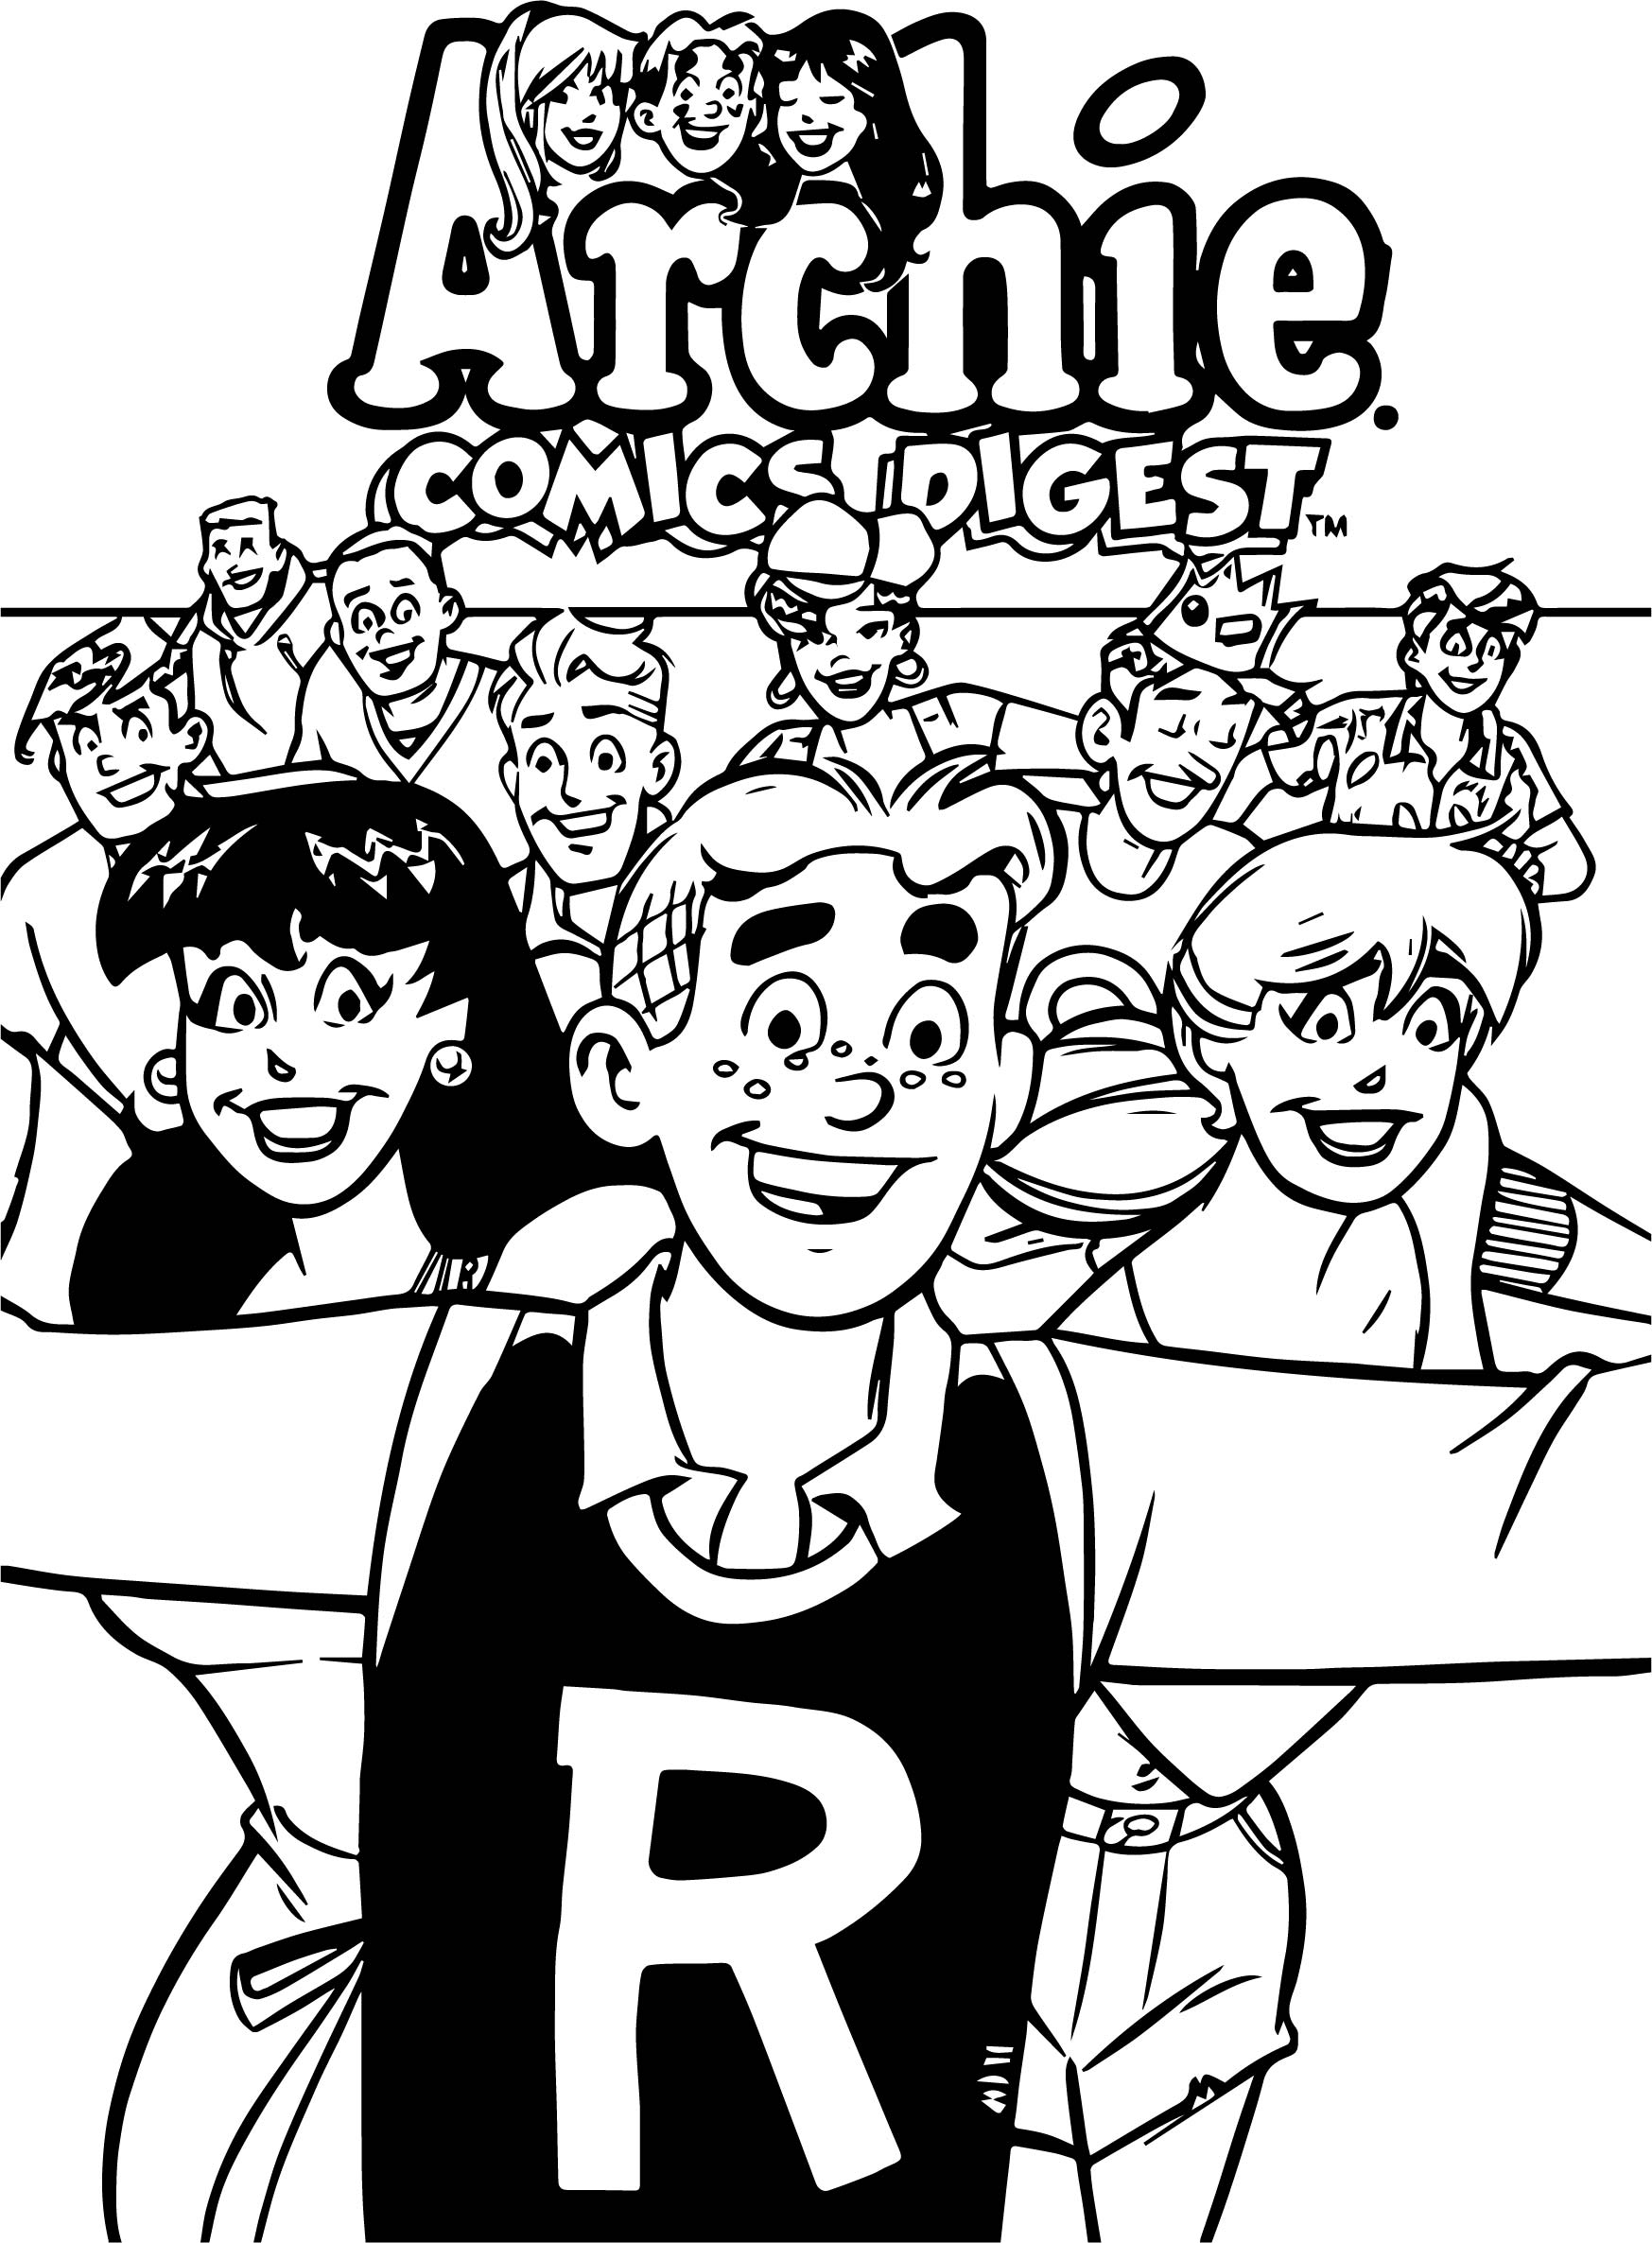 Running Archie Comics Coloring Page Wecoloringpage